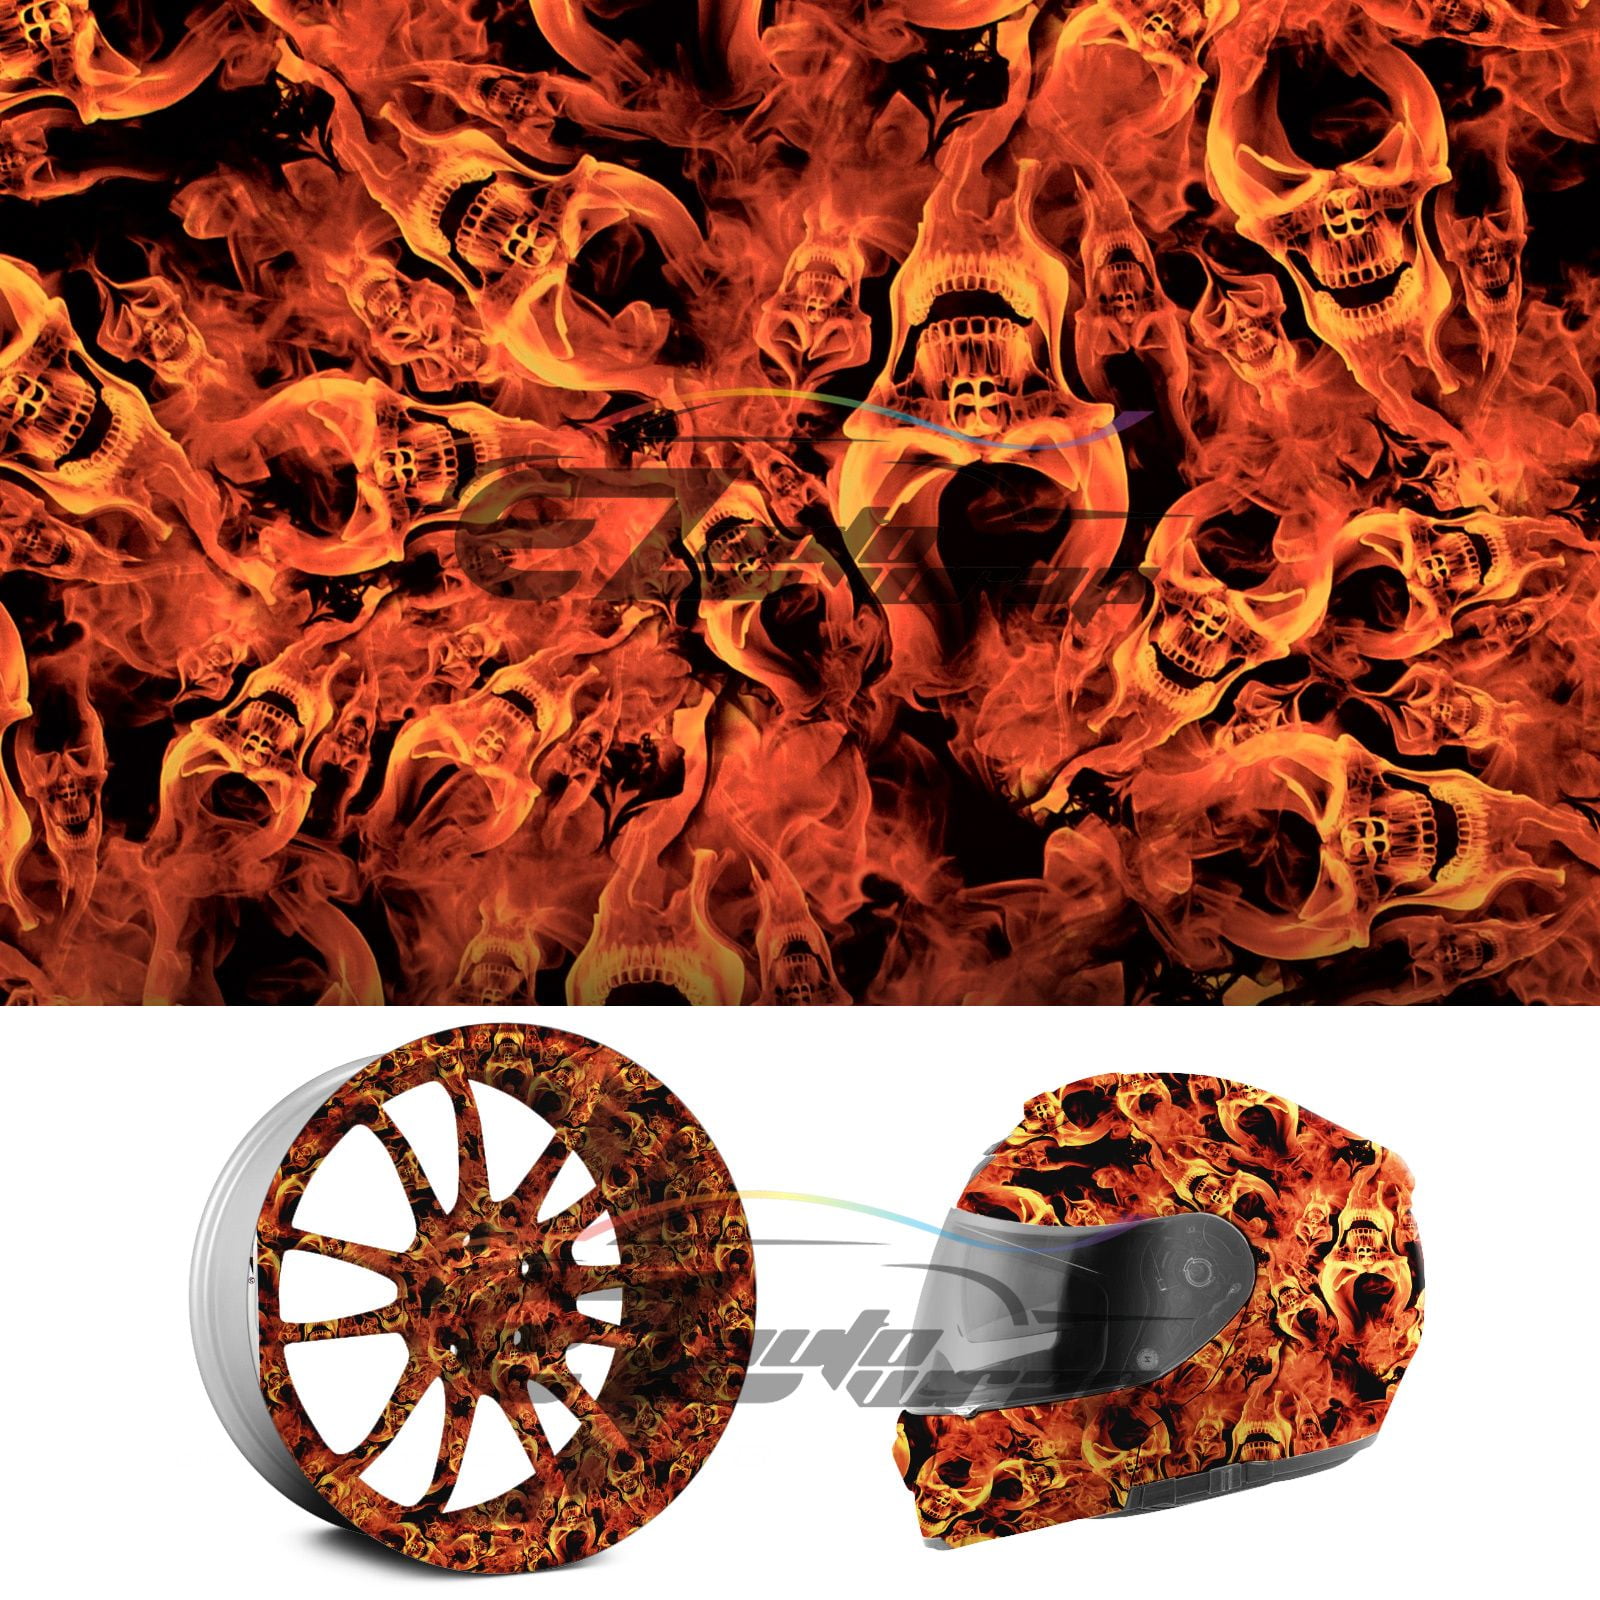 HYDROGRAPHIC WATER TRANSFER HYDRO FILM DIP EXPLOSION ORANGE FLAMES FIRE 1 SQ M 